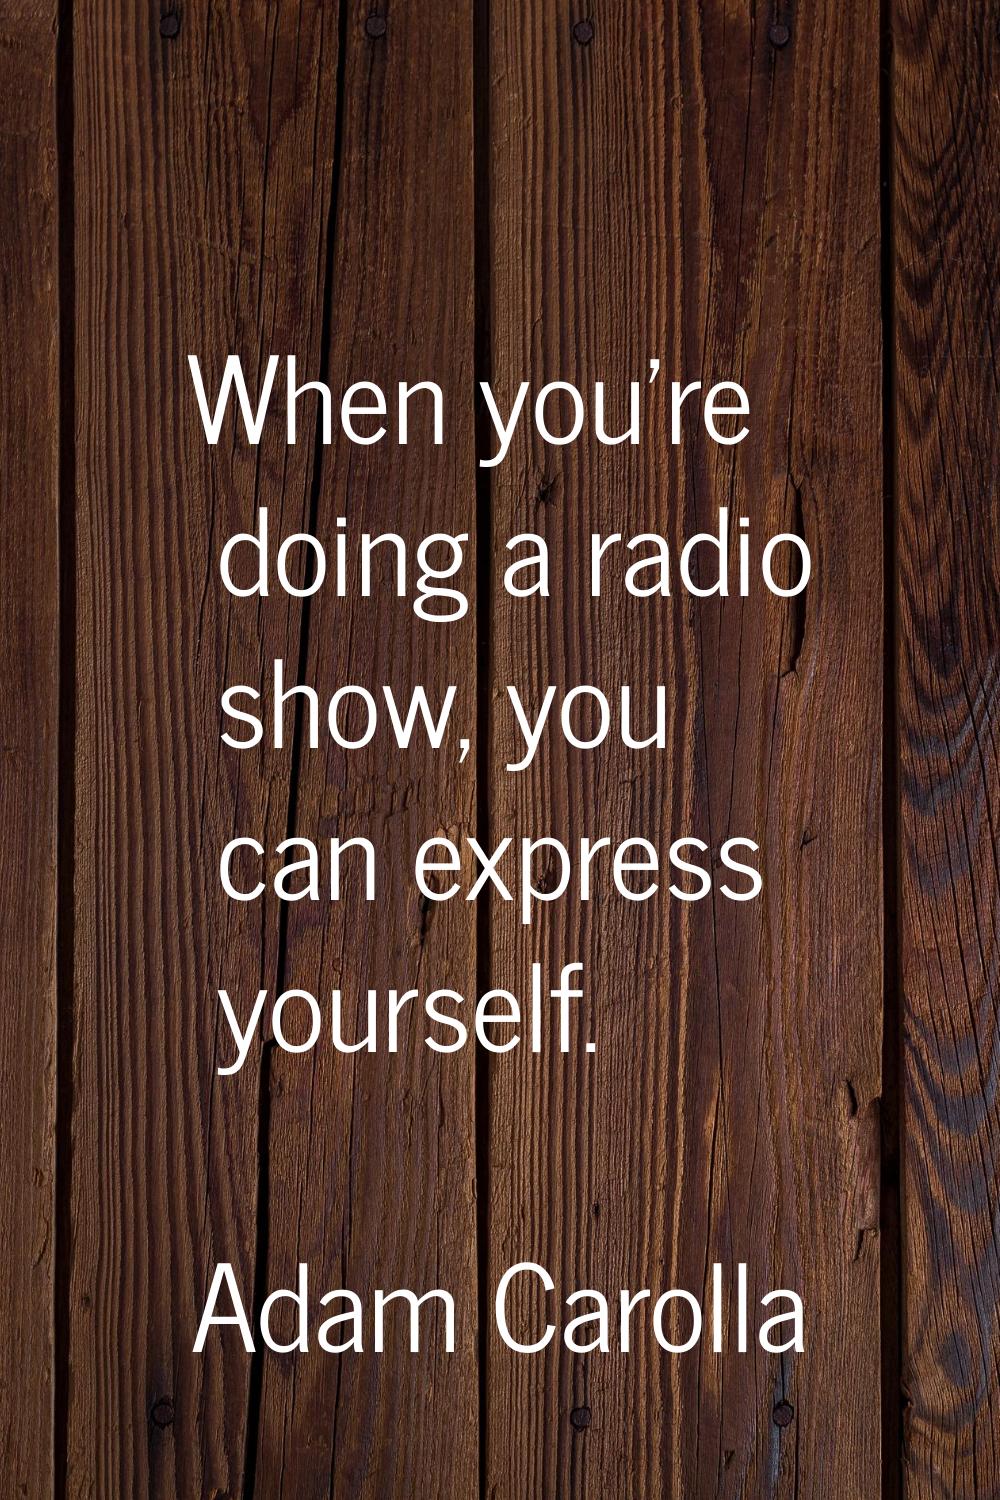 When you're doing a radio show, you can express yourself.